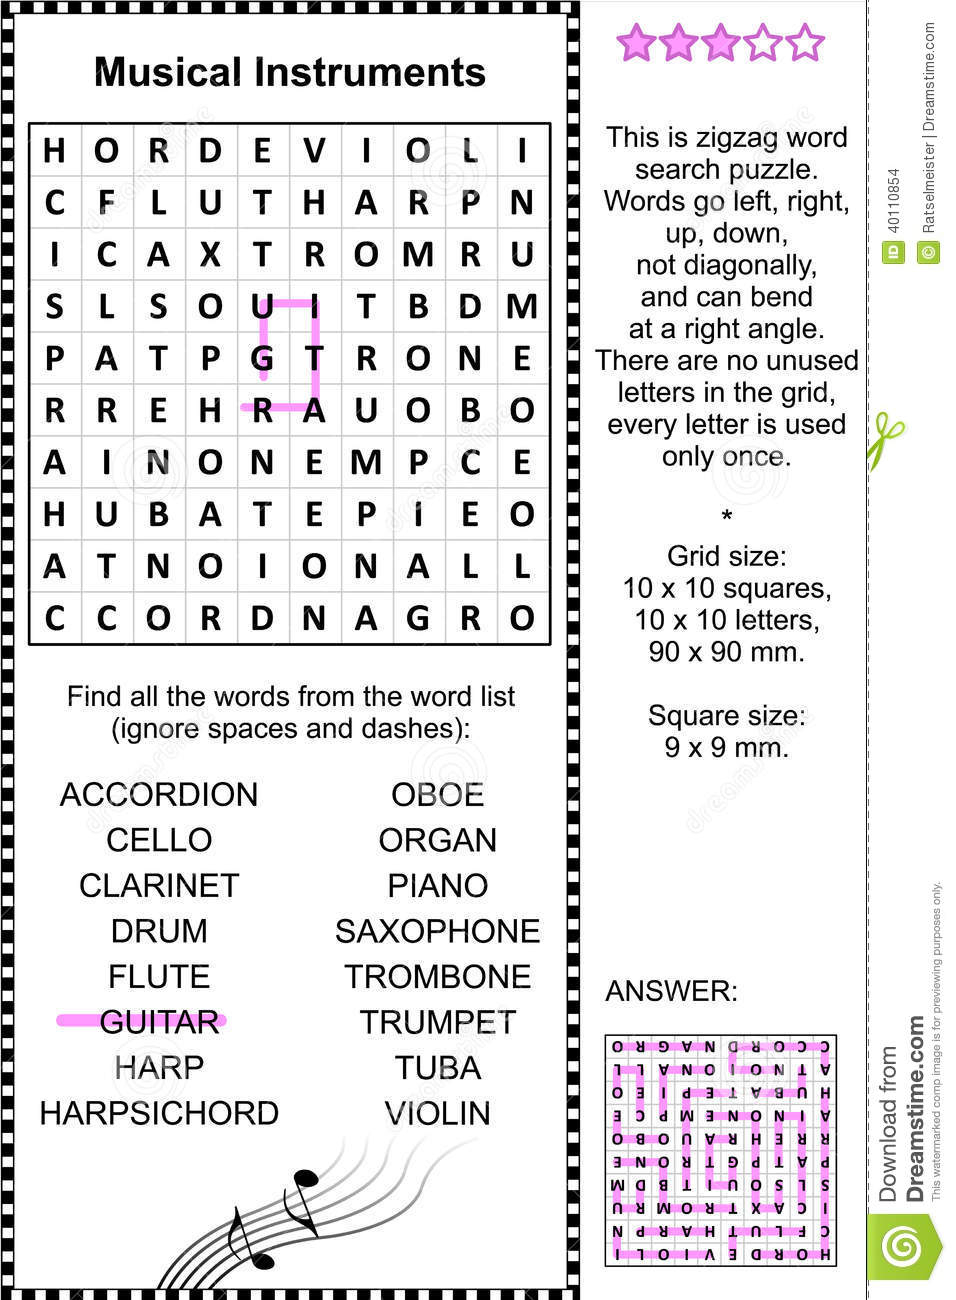 Printable Musical Instruments Crossword Puzzle